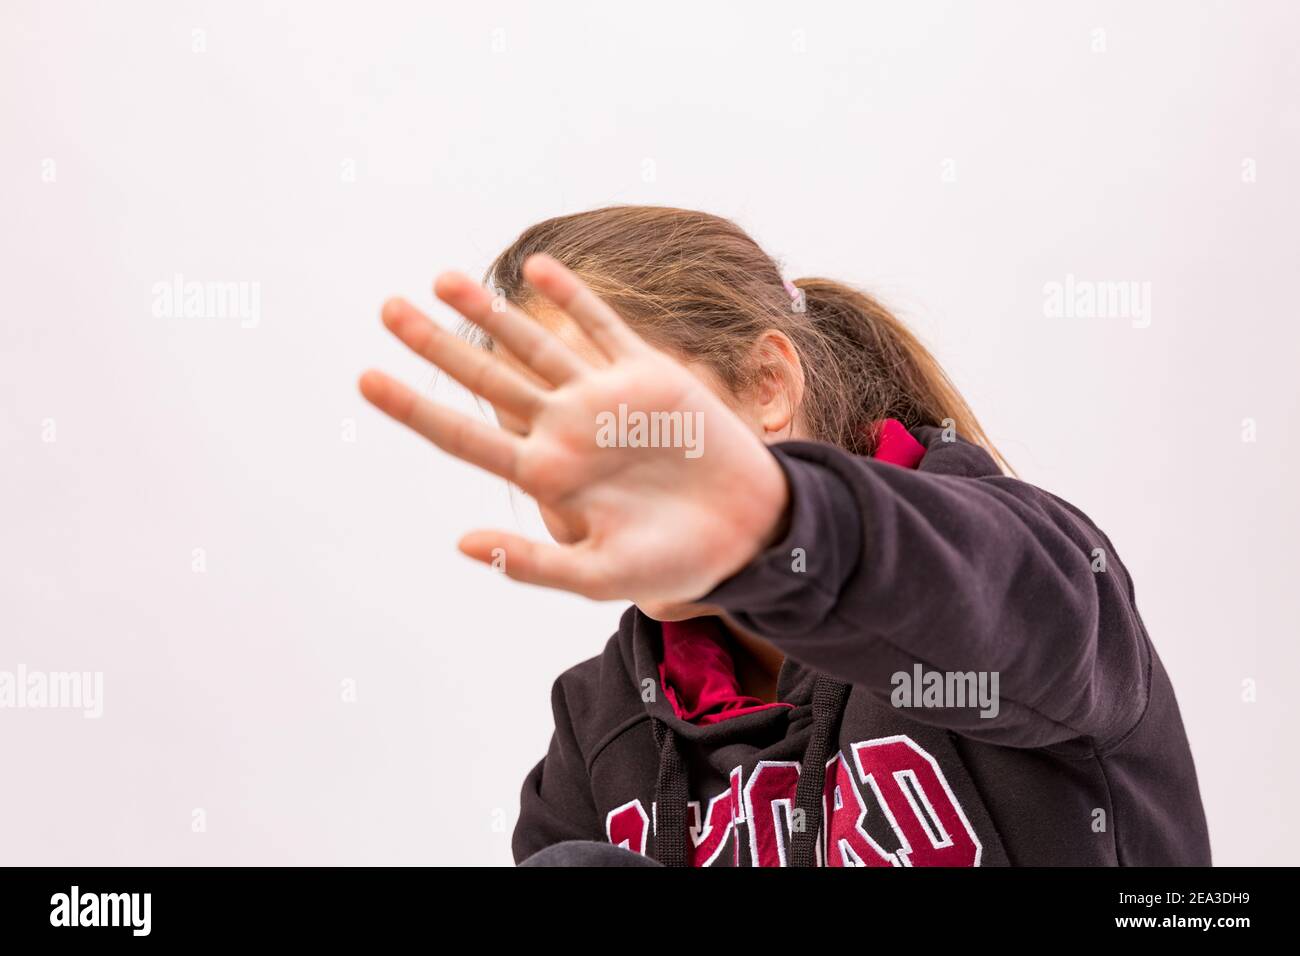 Young girl who denies being photographed shielding her face with hand in foreground Stock Photo